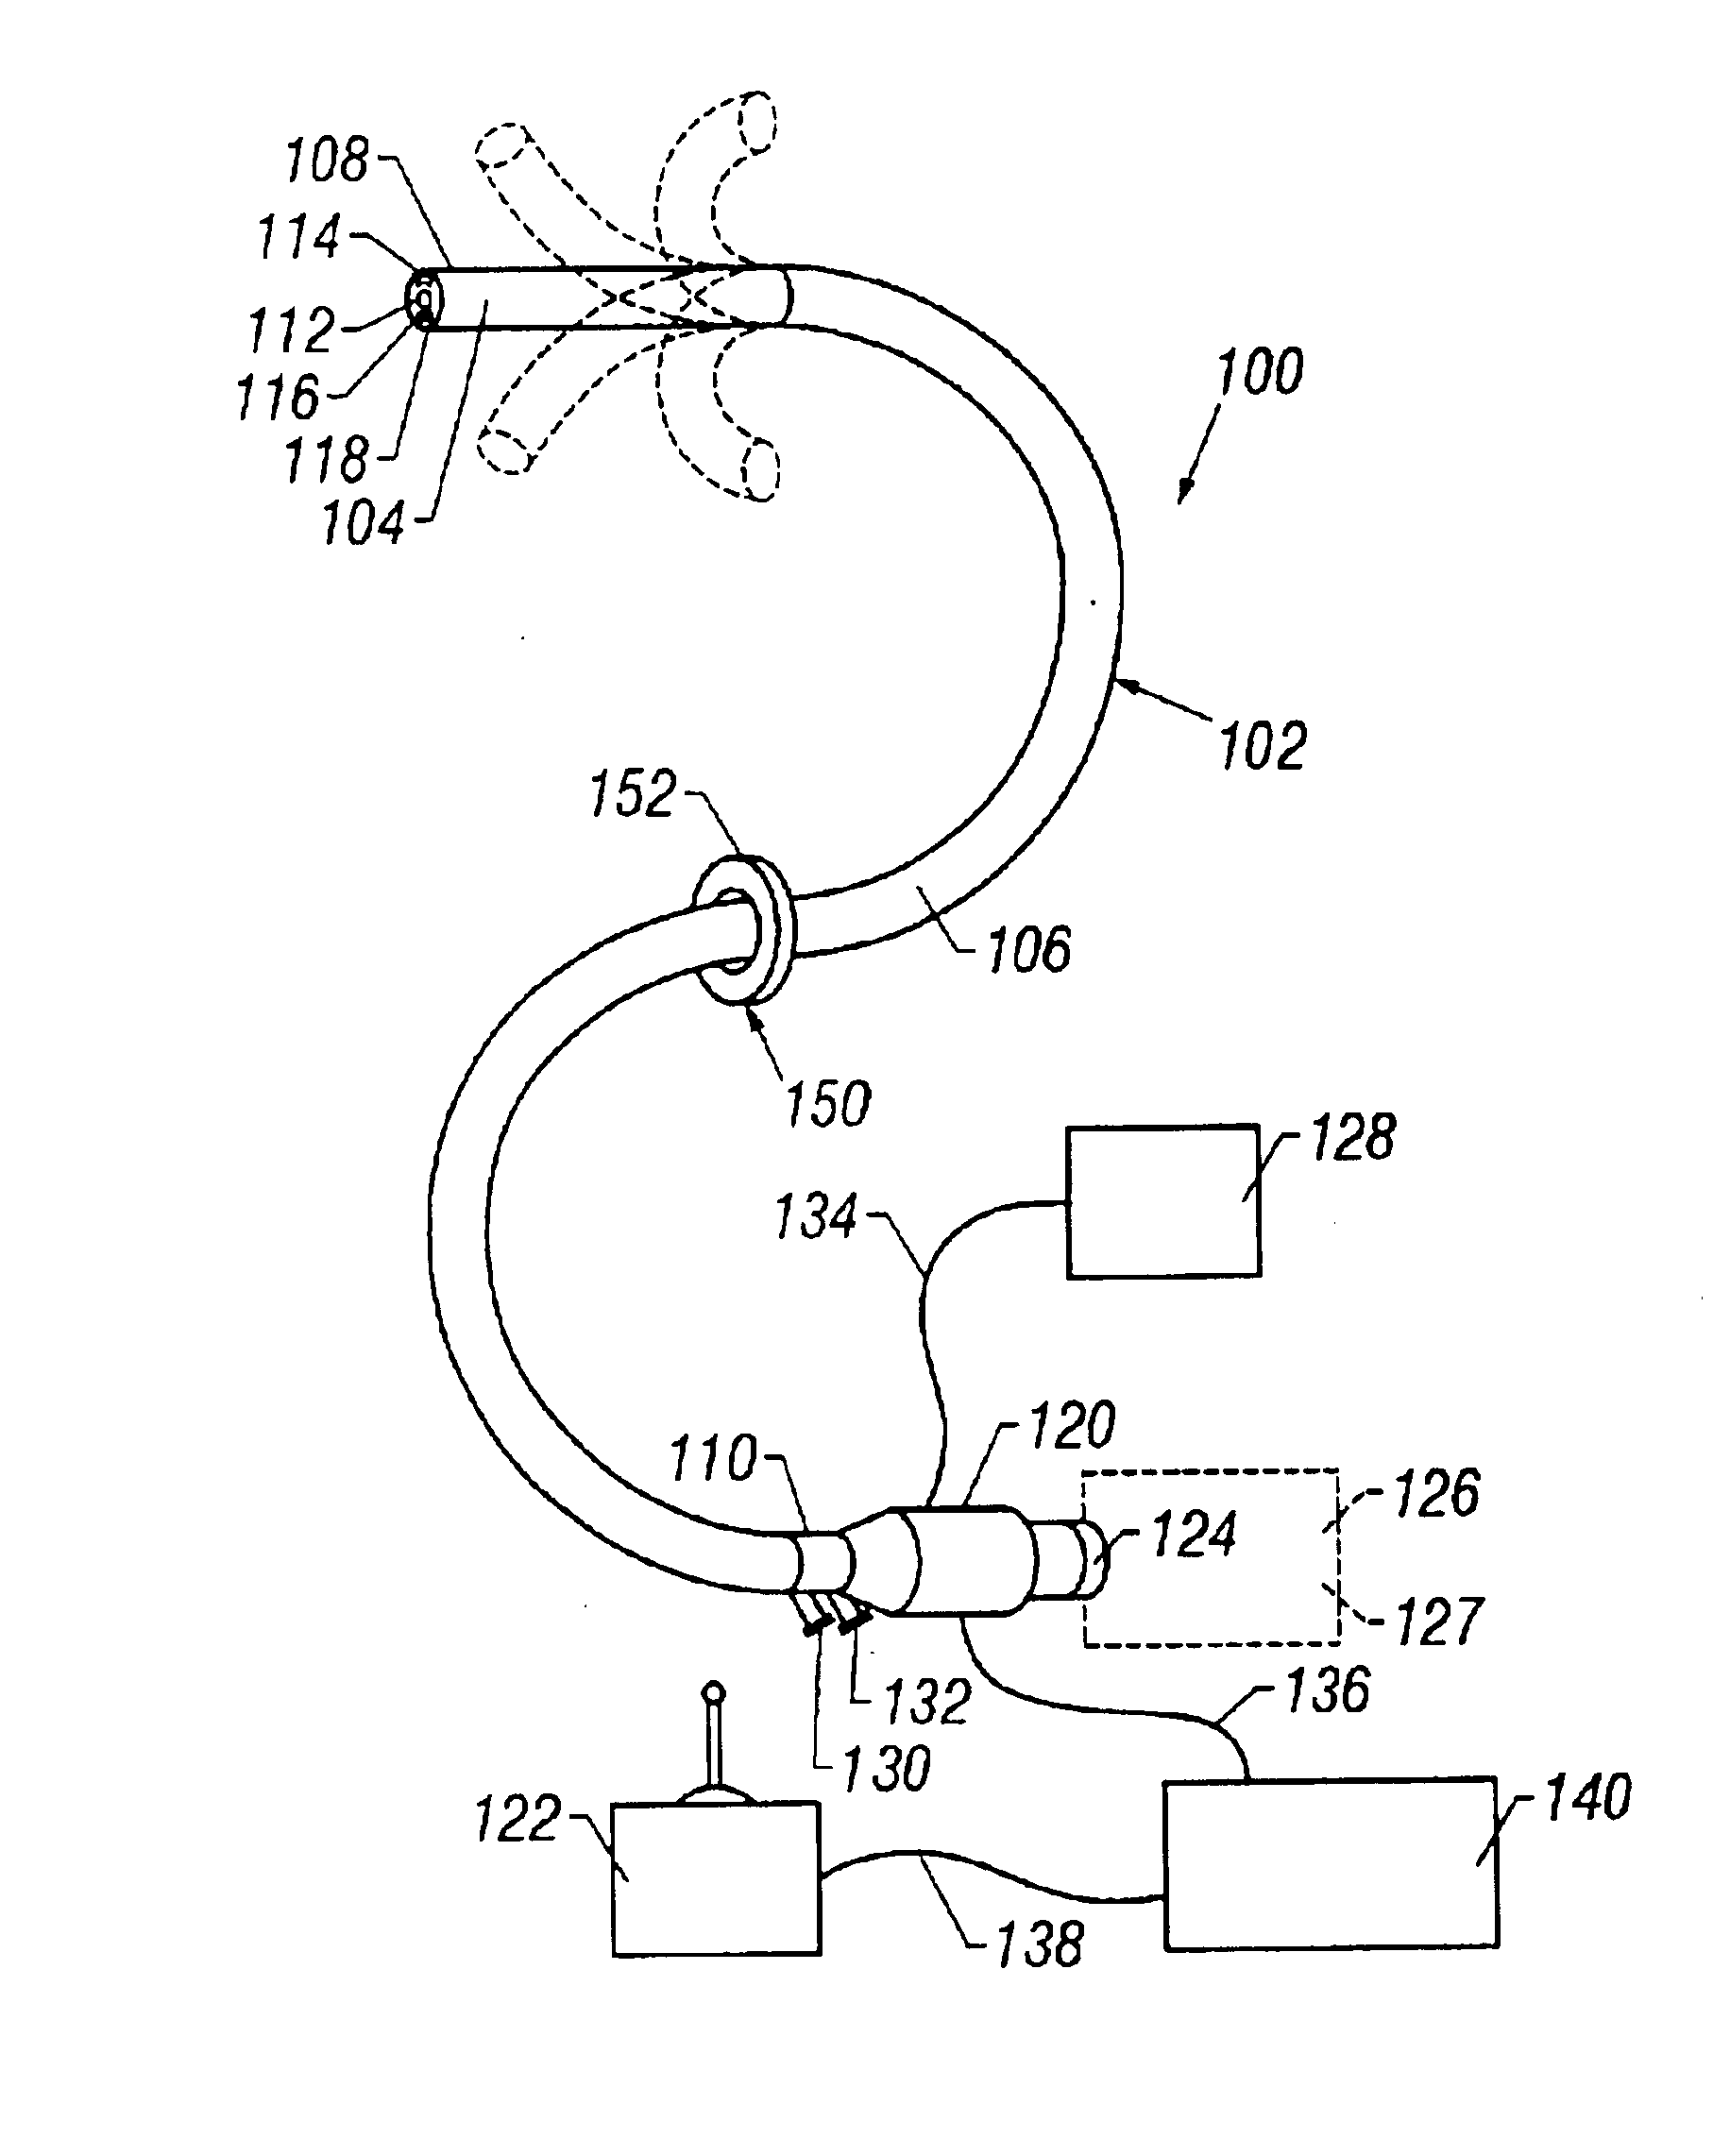 Steerable segmented endoscope and method of insertion